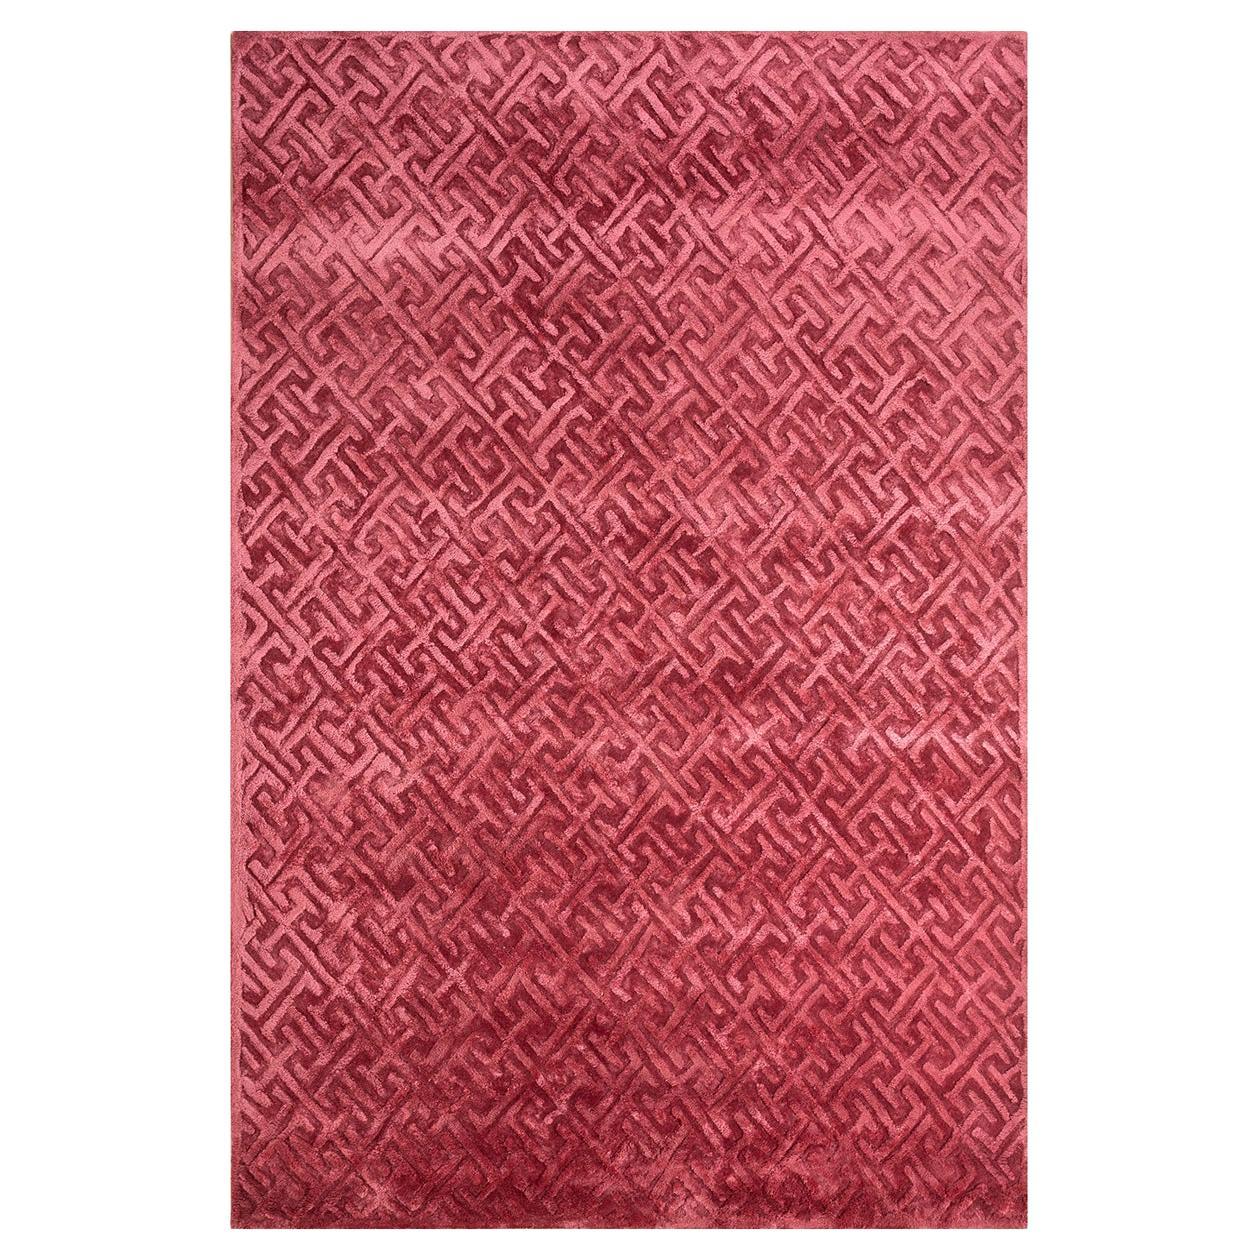 Angled Rug by Rural Weavers, Tufted, Wool, Viscose, 180x270cm For Sale